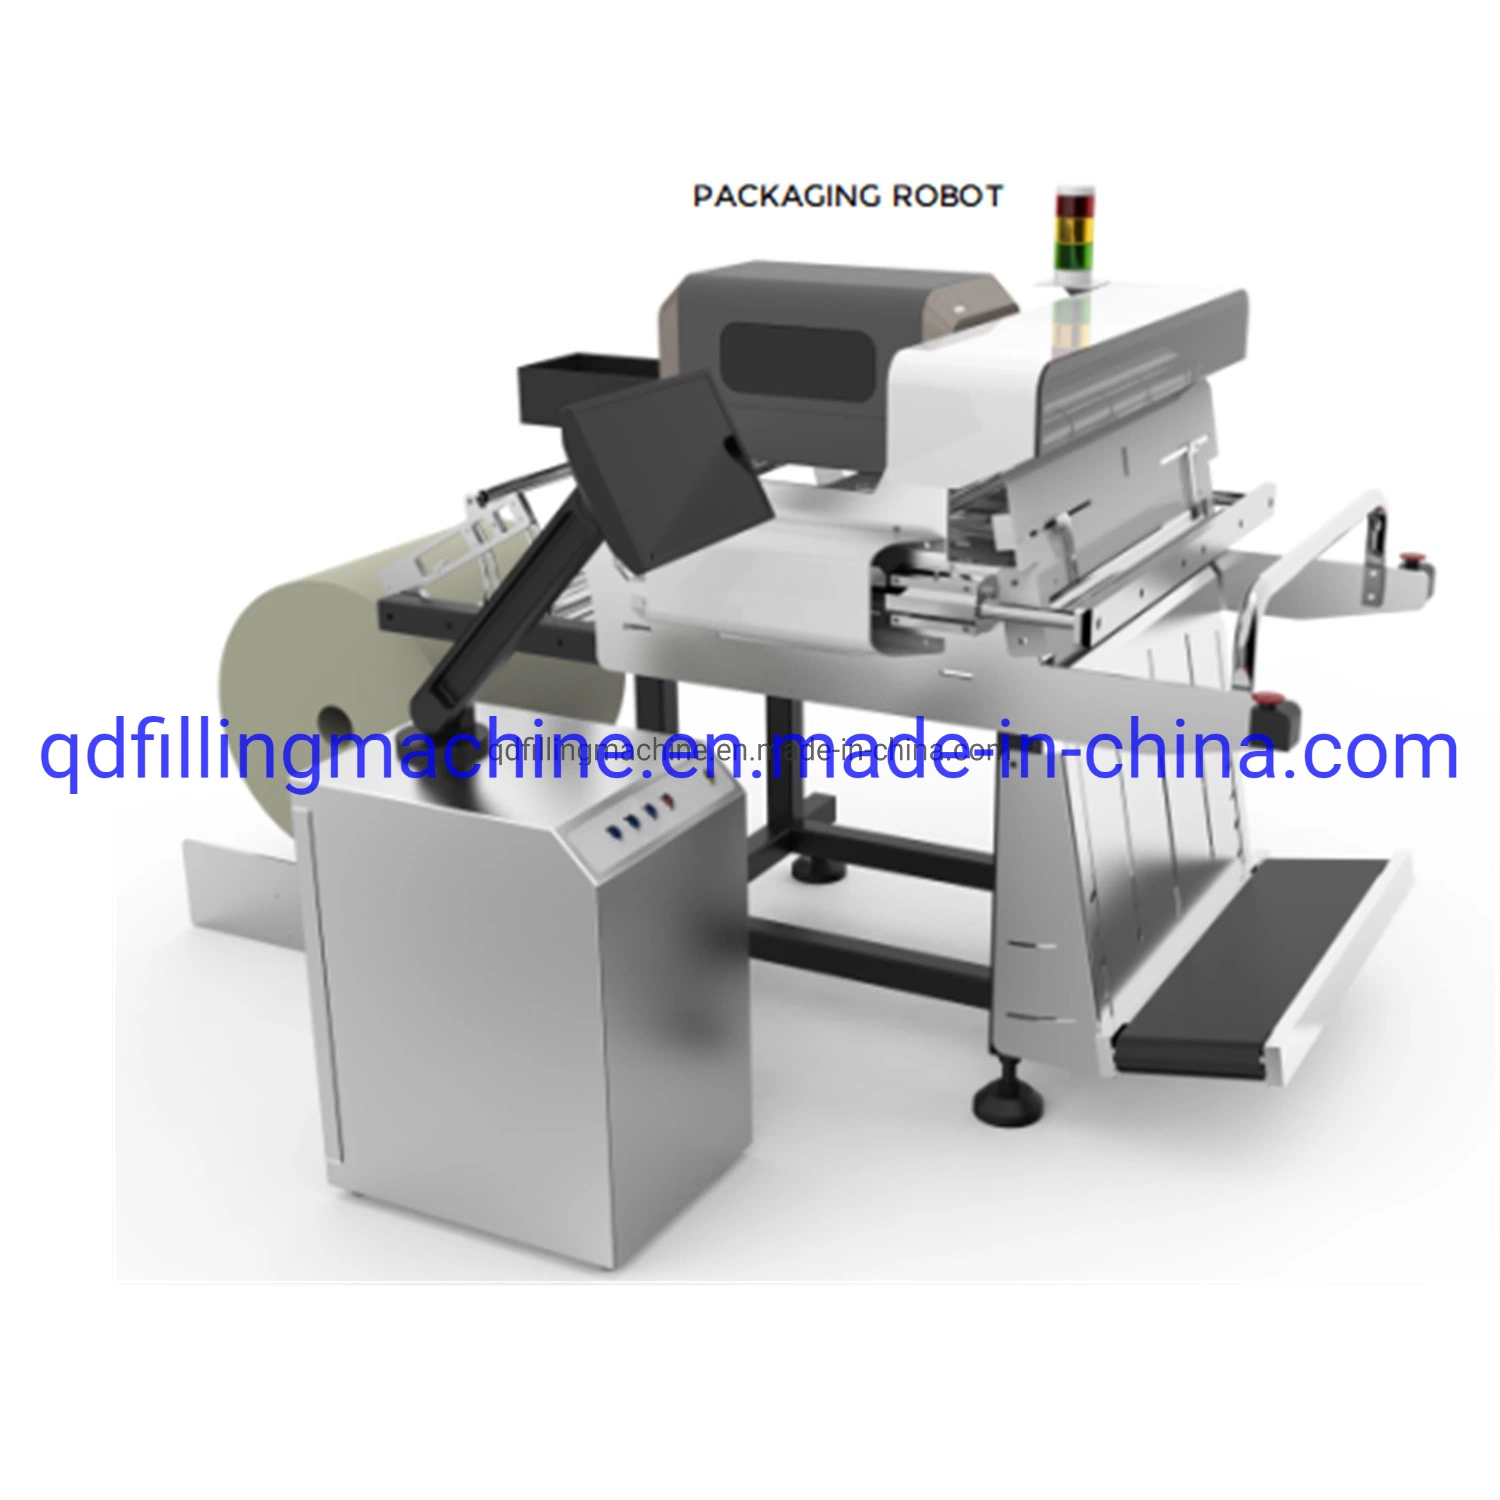 Automatic E-Shop Easy Garment Textile Printing and Packing Machine